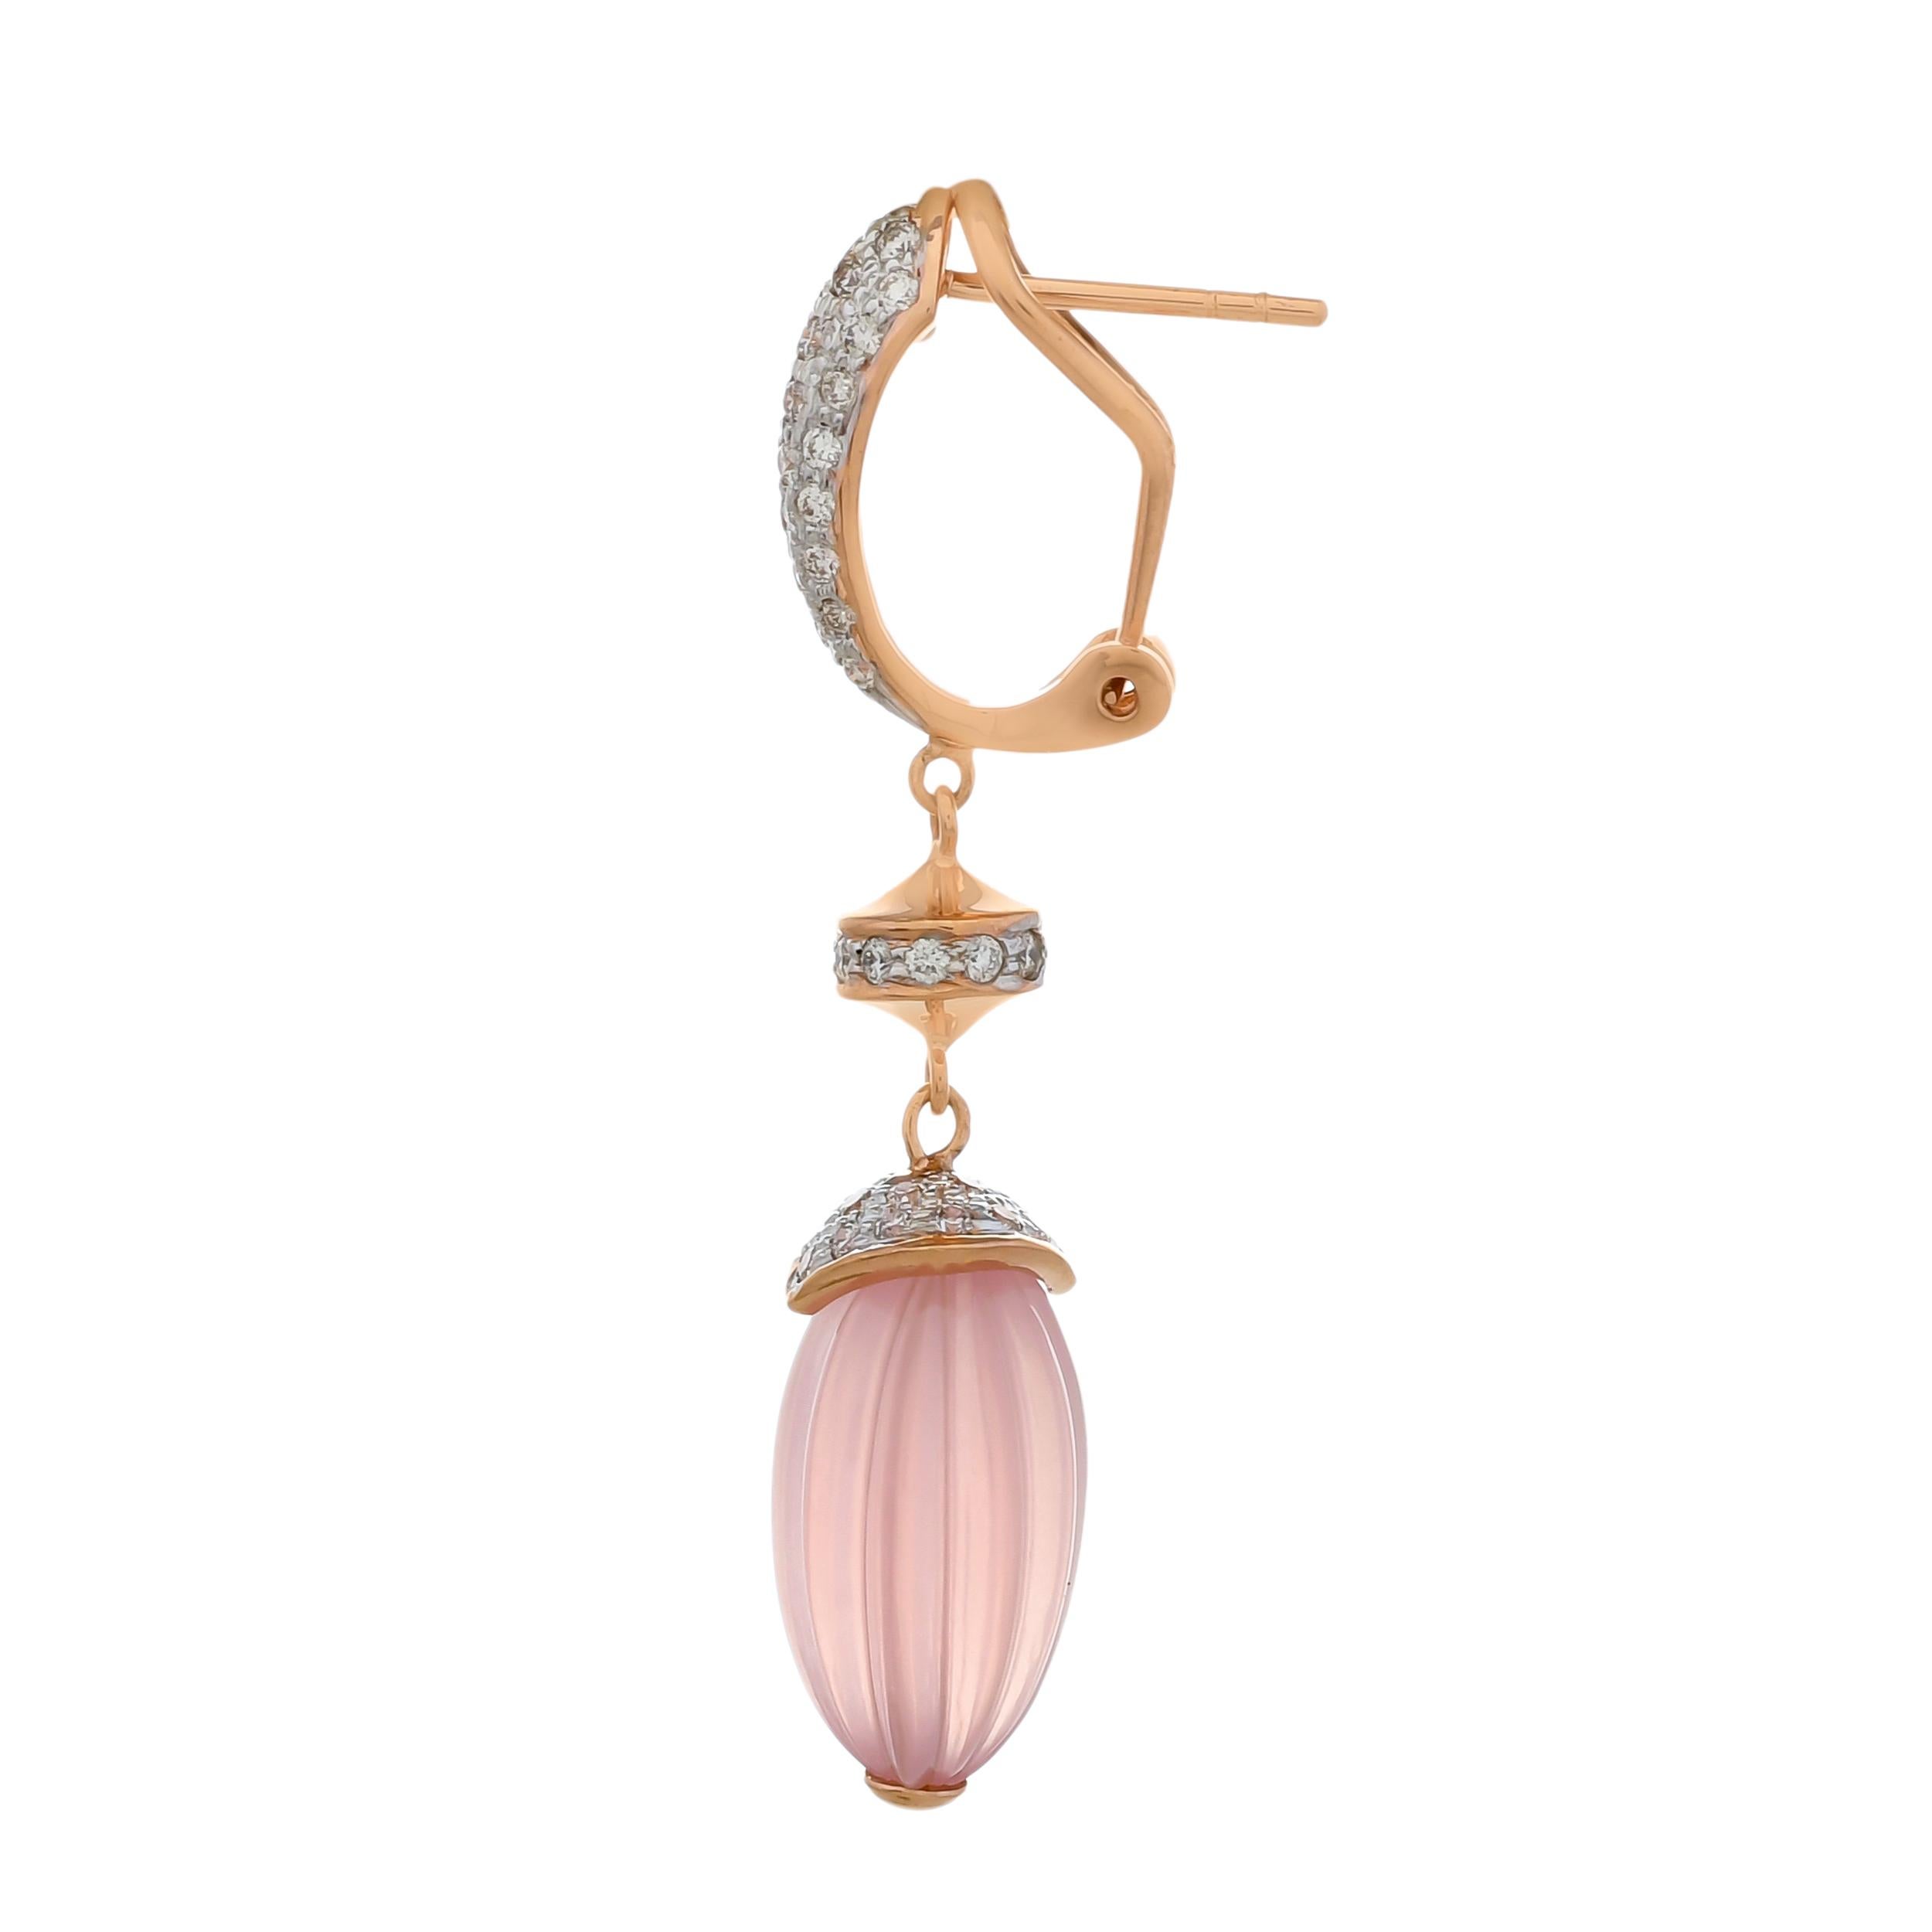 Fine luxury gets an avant garde lift through these stunning drop earrings crafted with pastel hues of hand carved rose quartz melons weighing approximately 36.52 carats and gleaming glow of diamonds with a total diamond weight of 1.65 carats. These